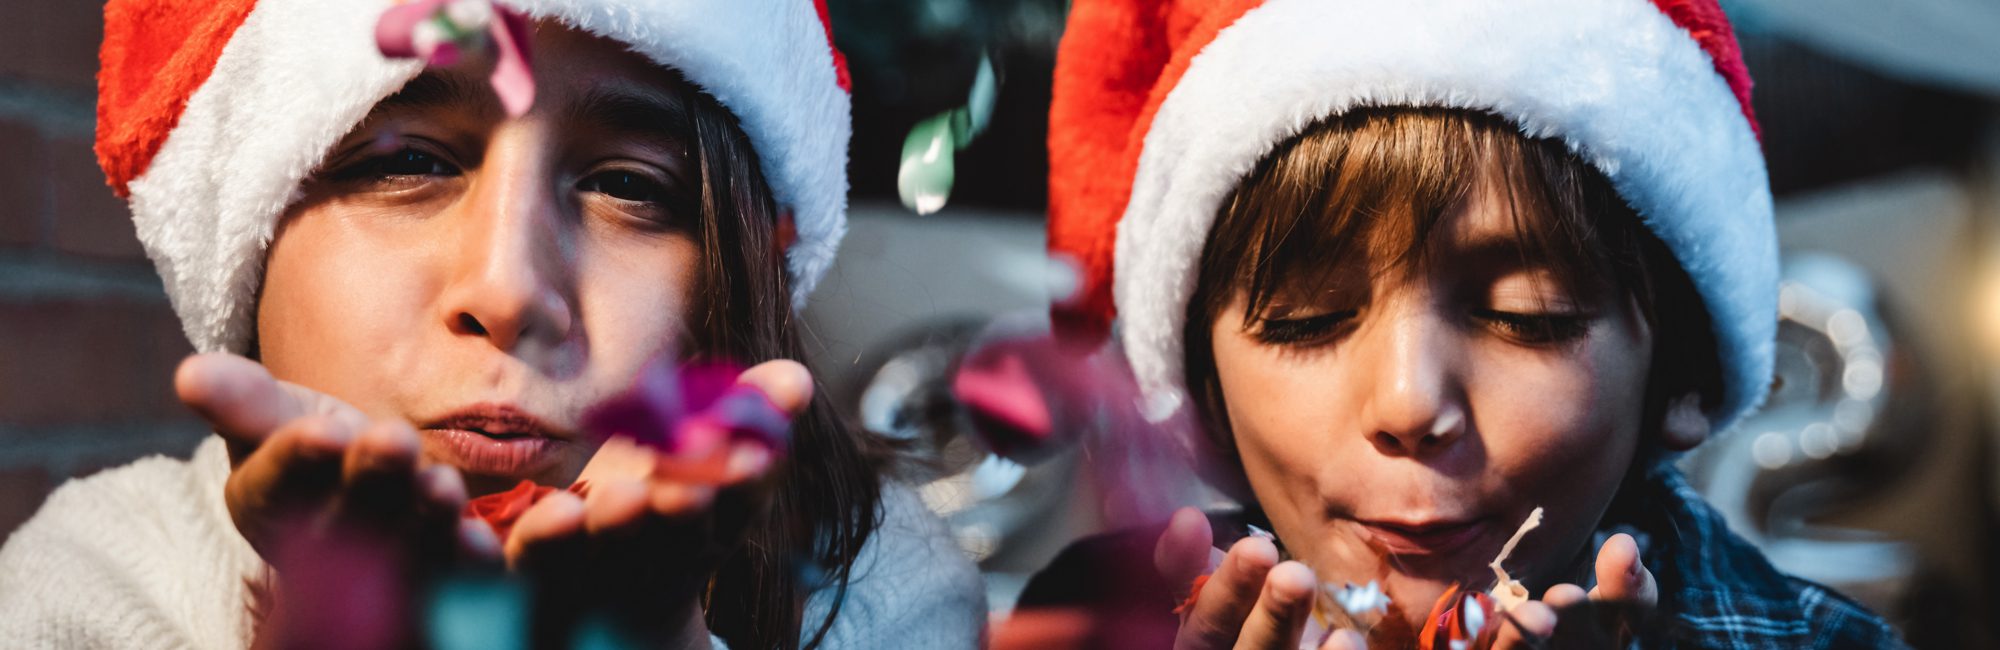 Holidays - Little girl and boy wearing Santa hats, blowing confetti from their hands towards camera